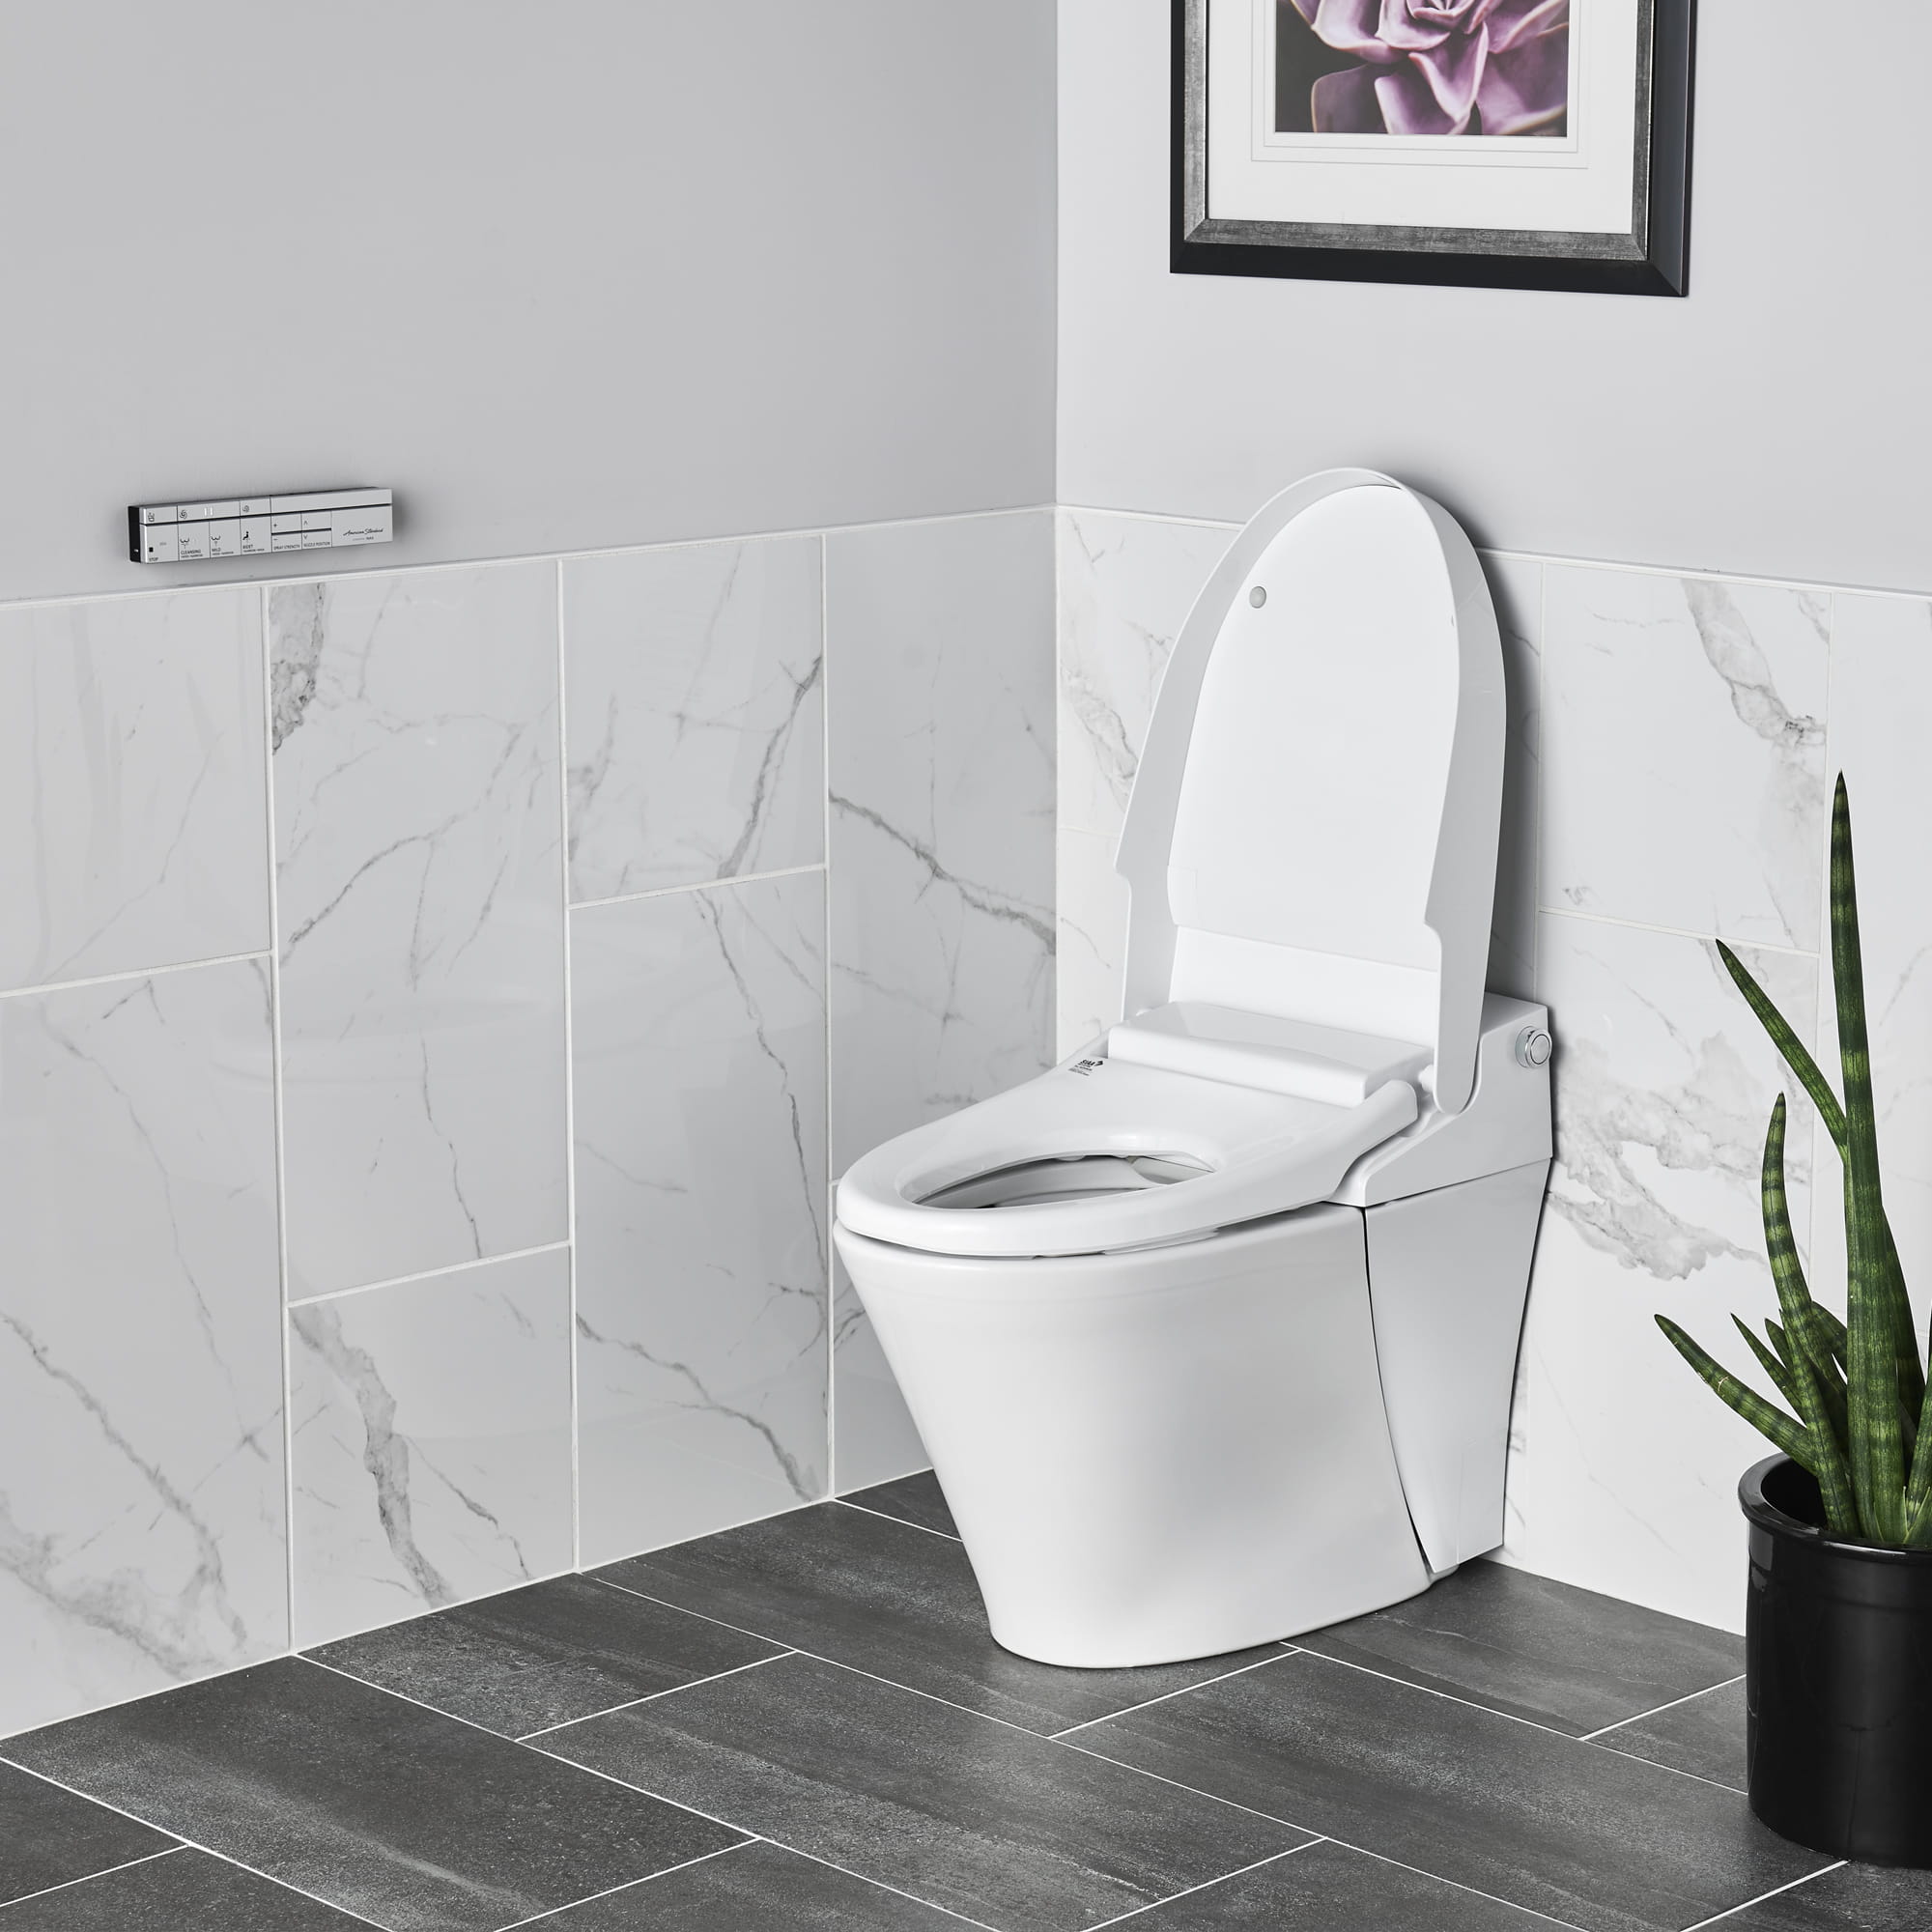 Toilette SpaLet Advanced Clean 100 Chasse double WaterSenseMD 132 - 092 gpc  49 - 34 lpc ALABASTER WHITE